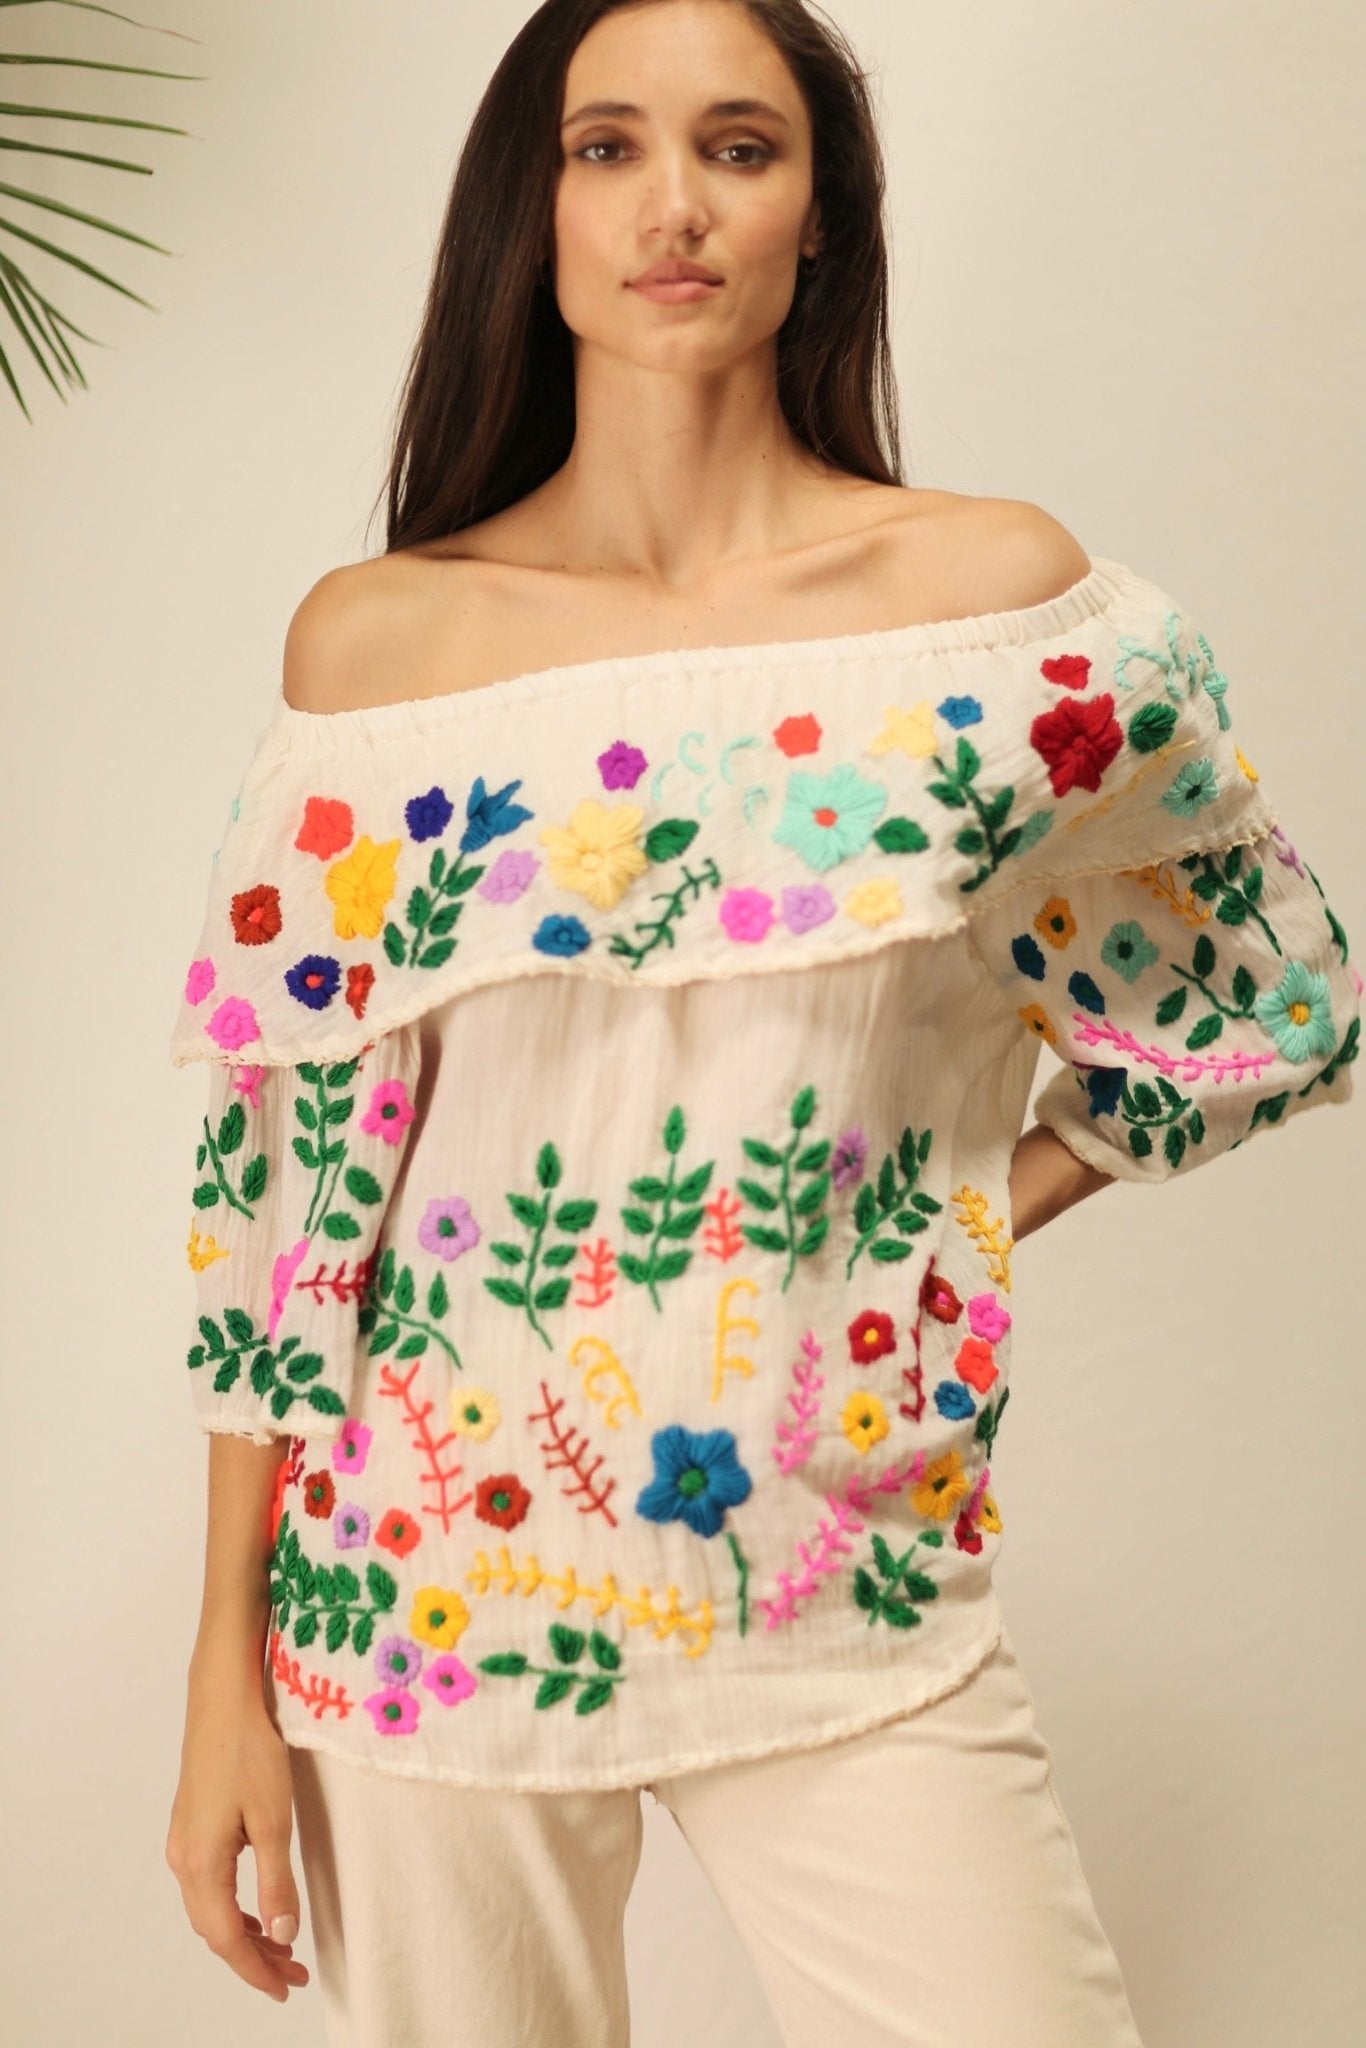 LITTLE FLOWERS TOP WHITE COLOR - BANGKOK TAILOR CLOTHING STORE - HANDMADE CLOTHING